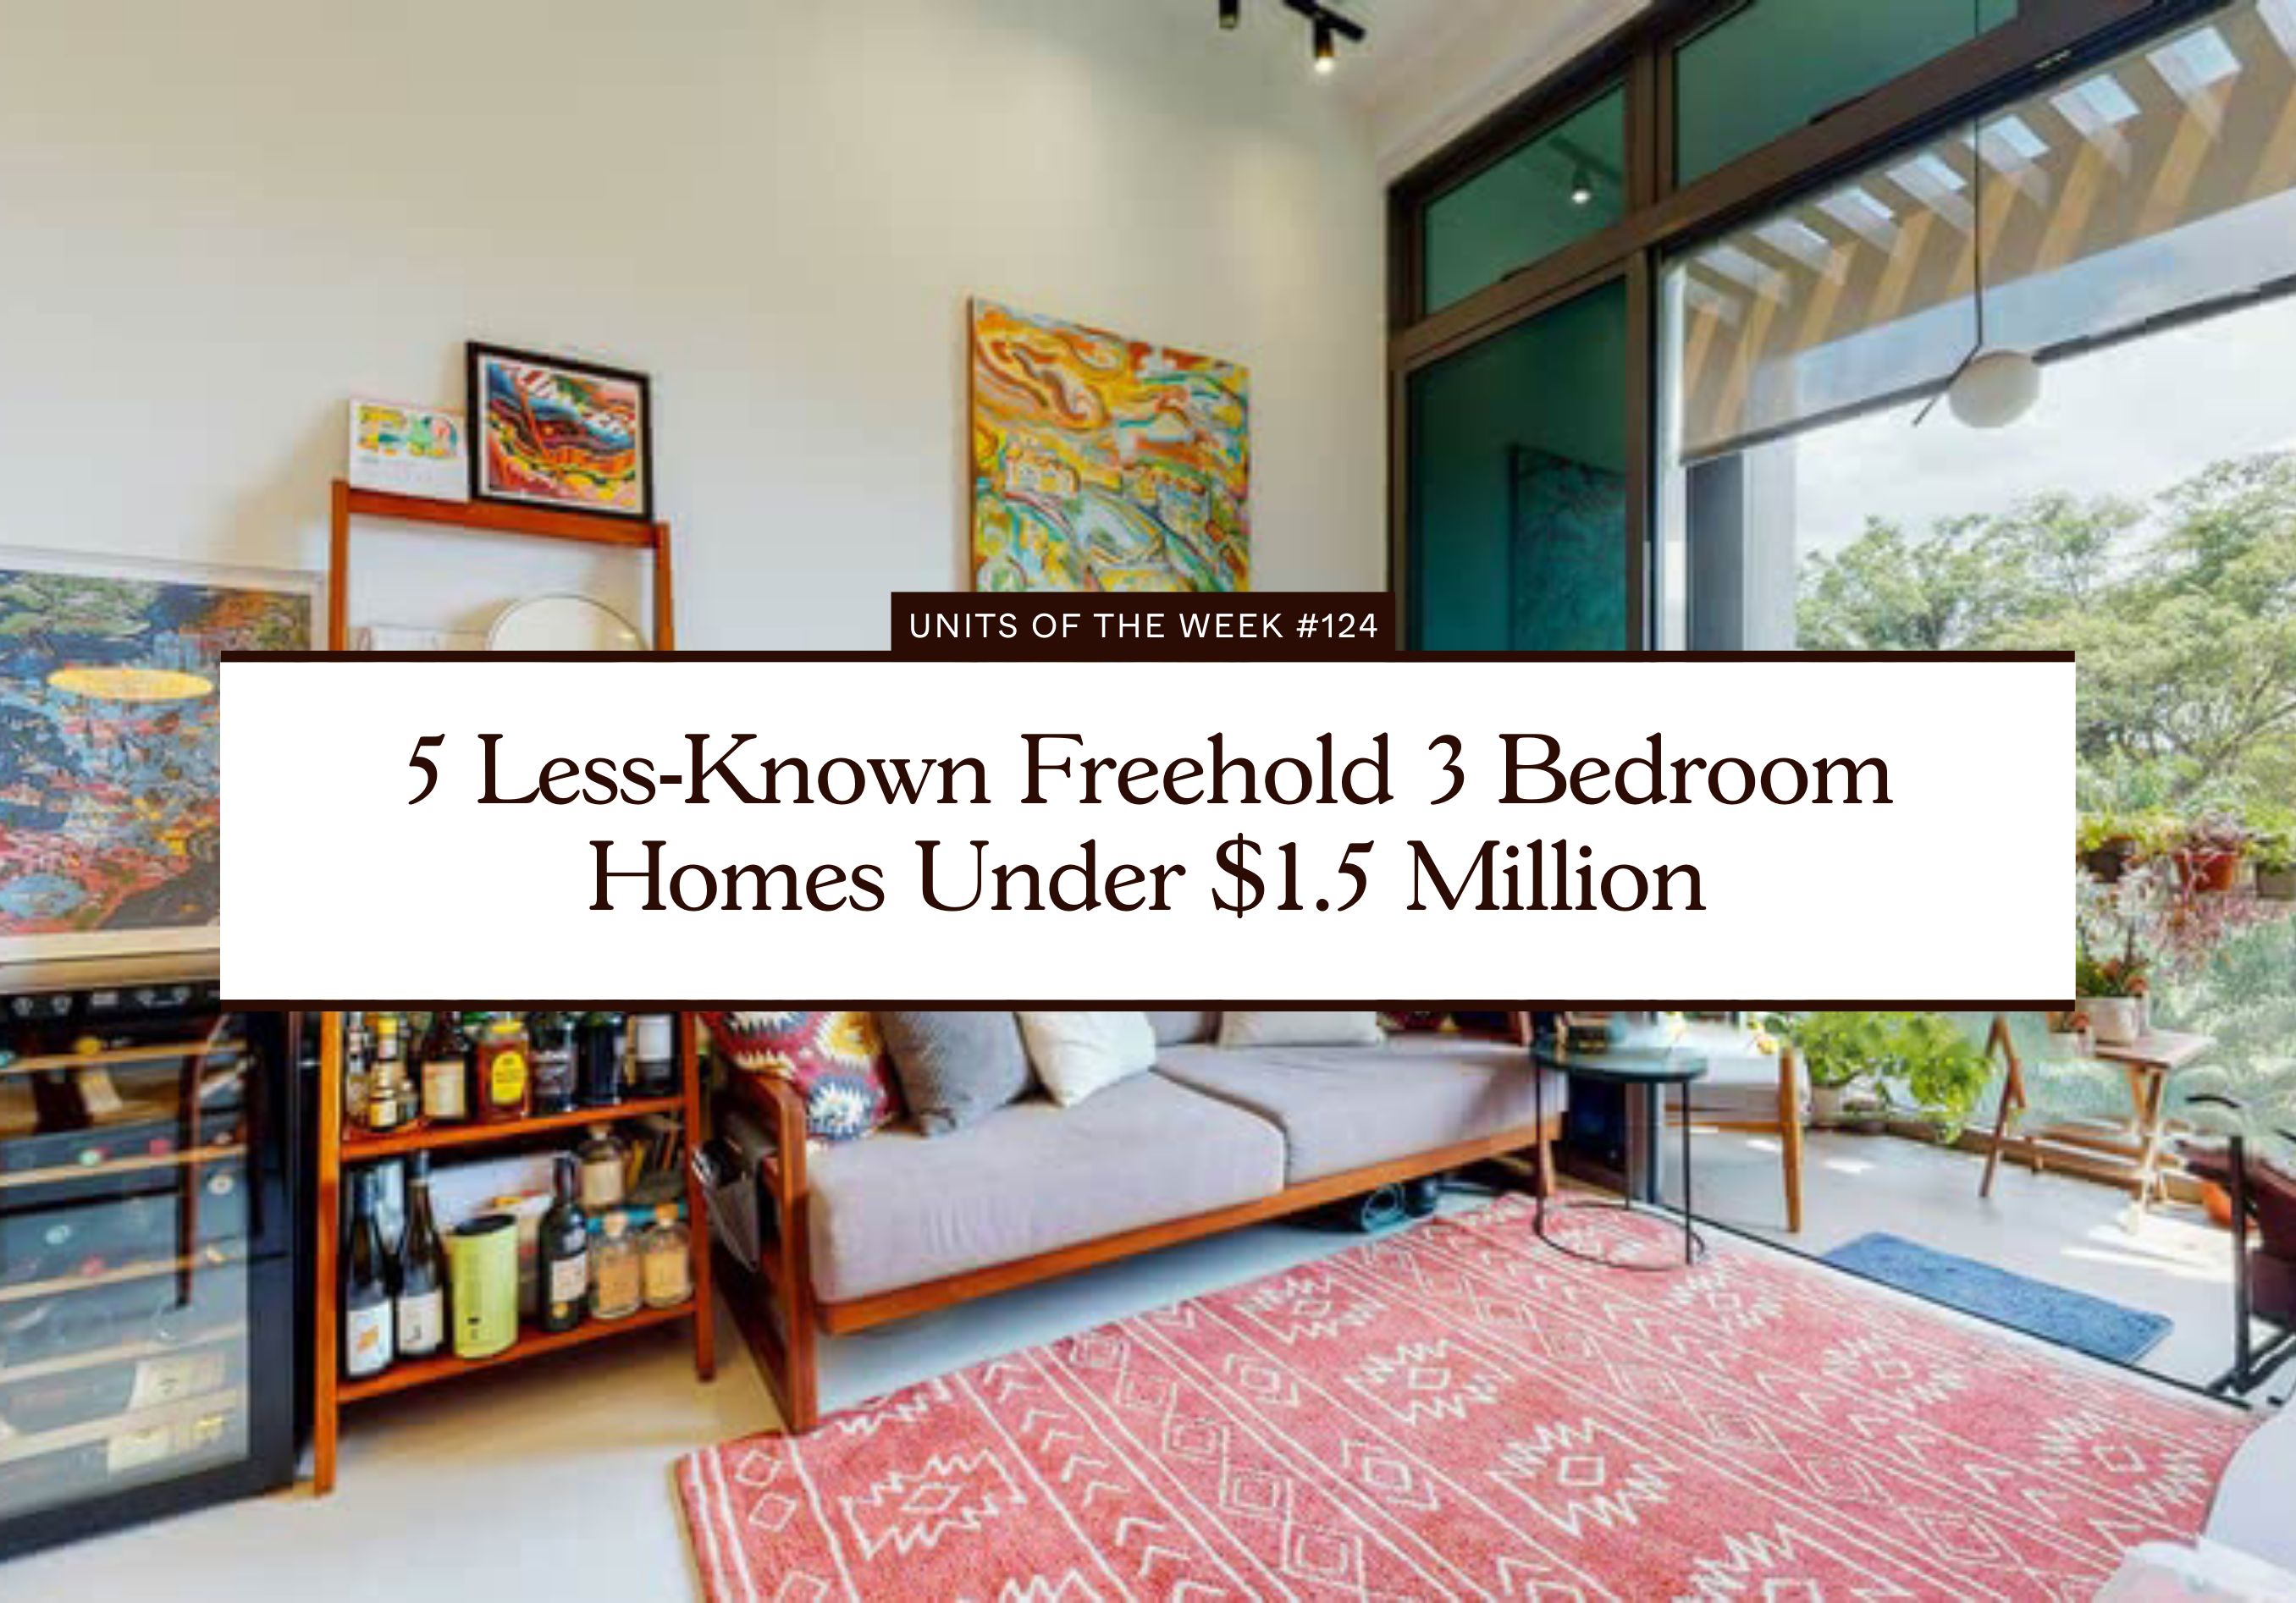 5 Less Known Freehold 3 Bedroom Homes Under 1.5 Million